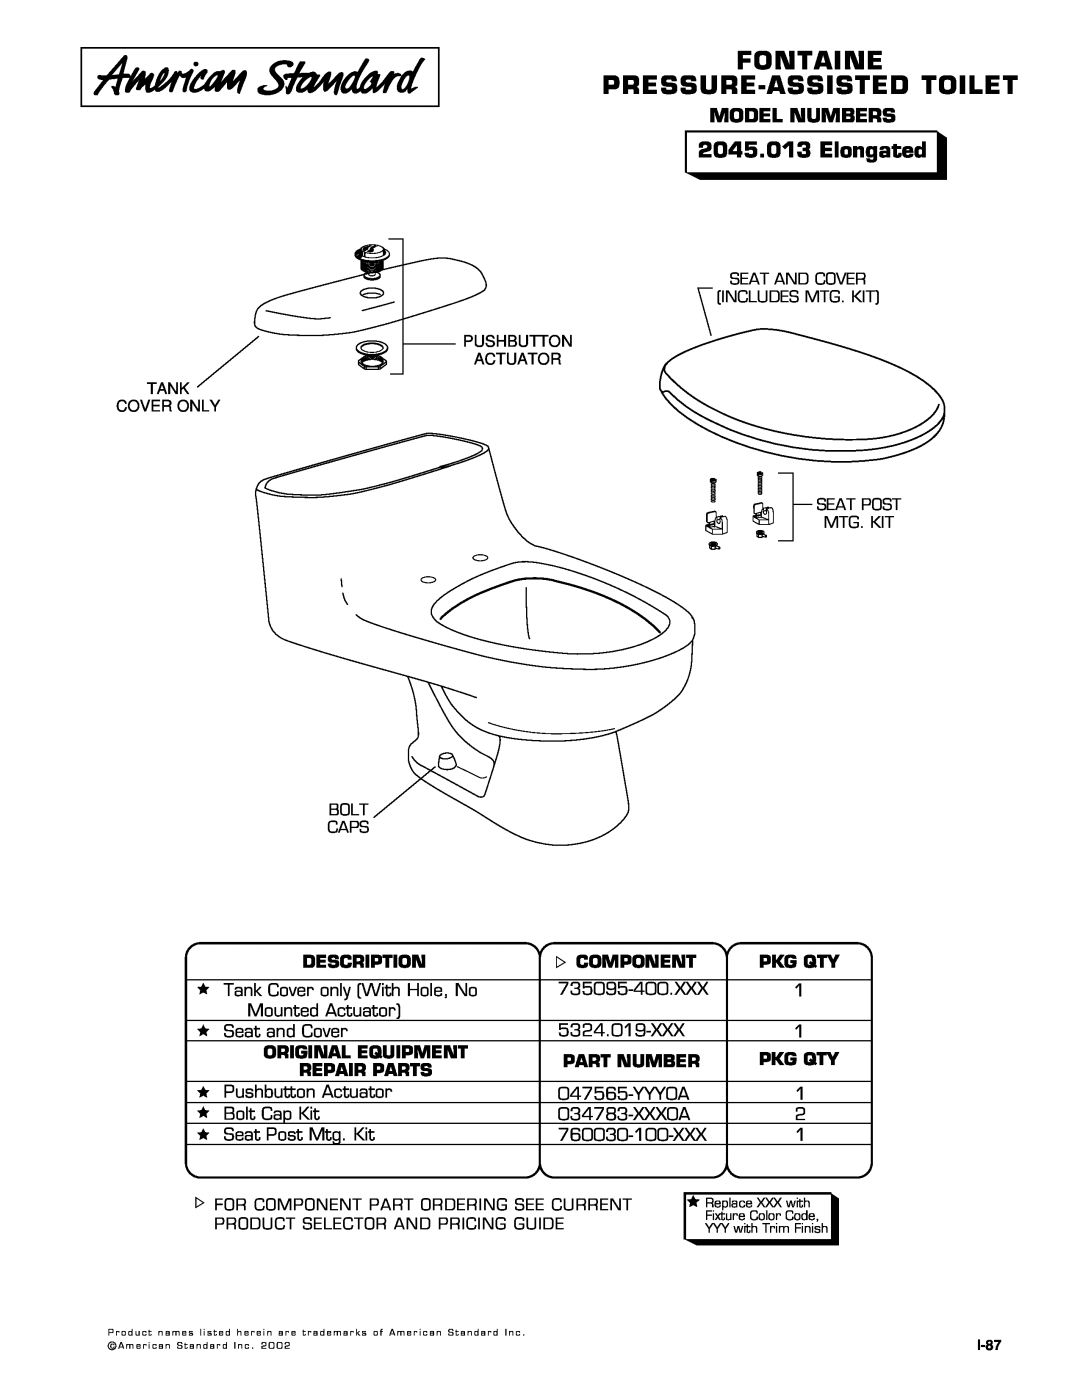 American Standard 2045.013 manual Fontaine Pressure-Assistedtoilet, Elongated, Model Numbers, Description, Component 